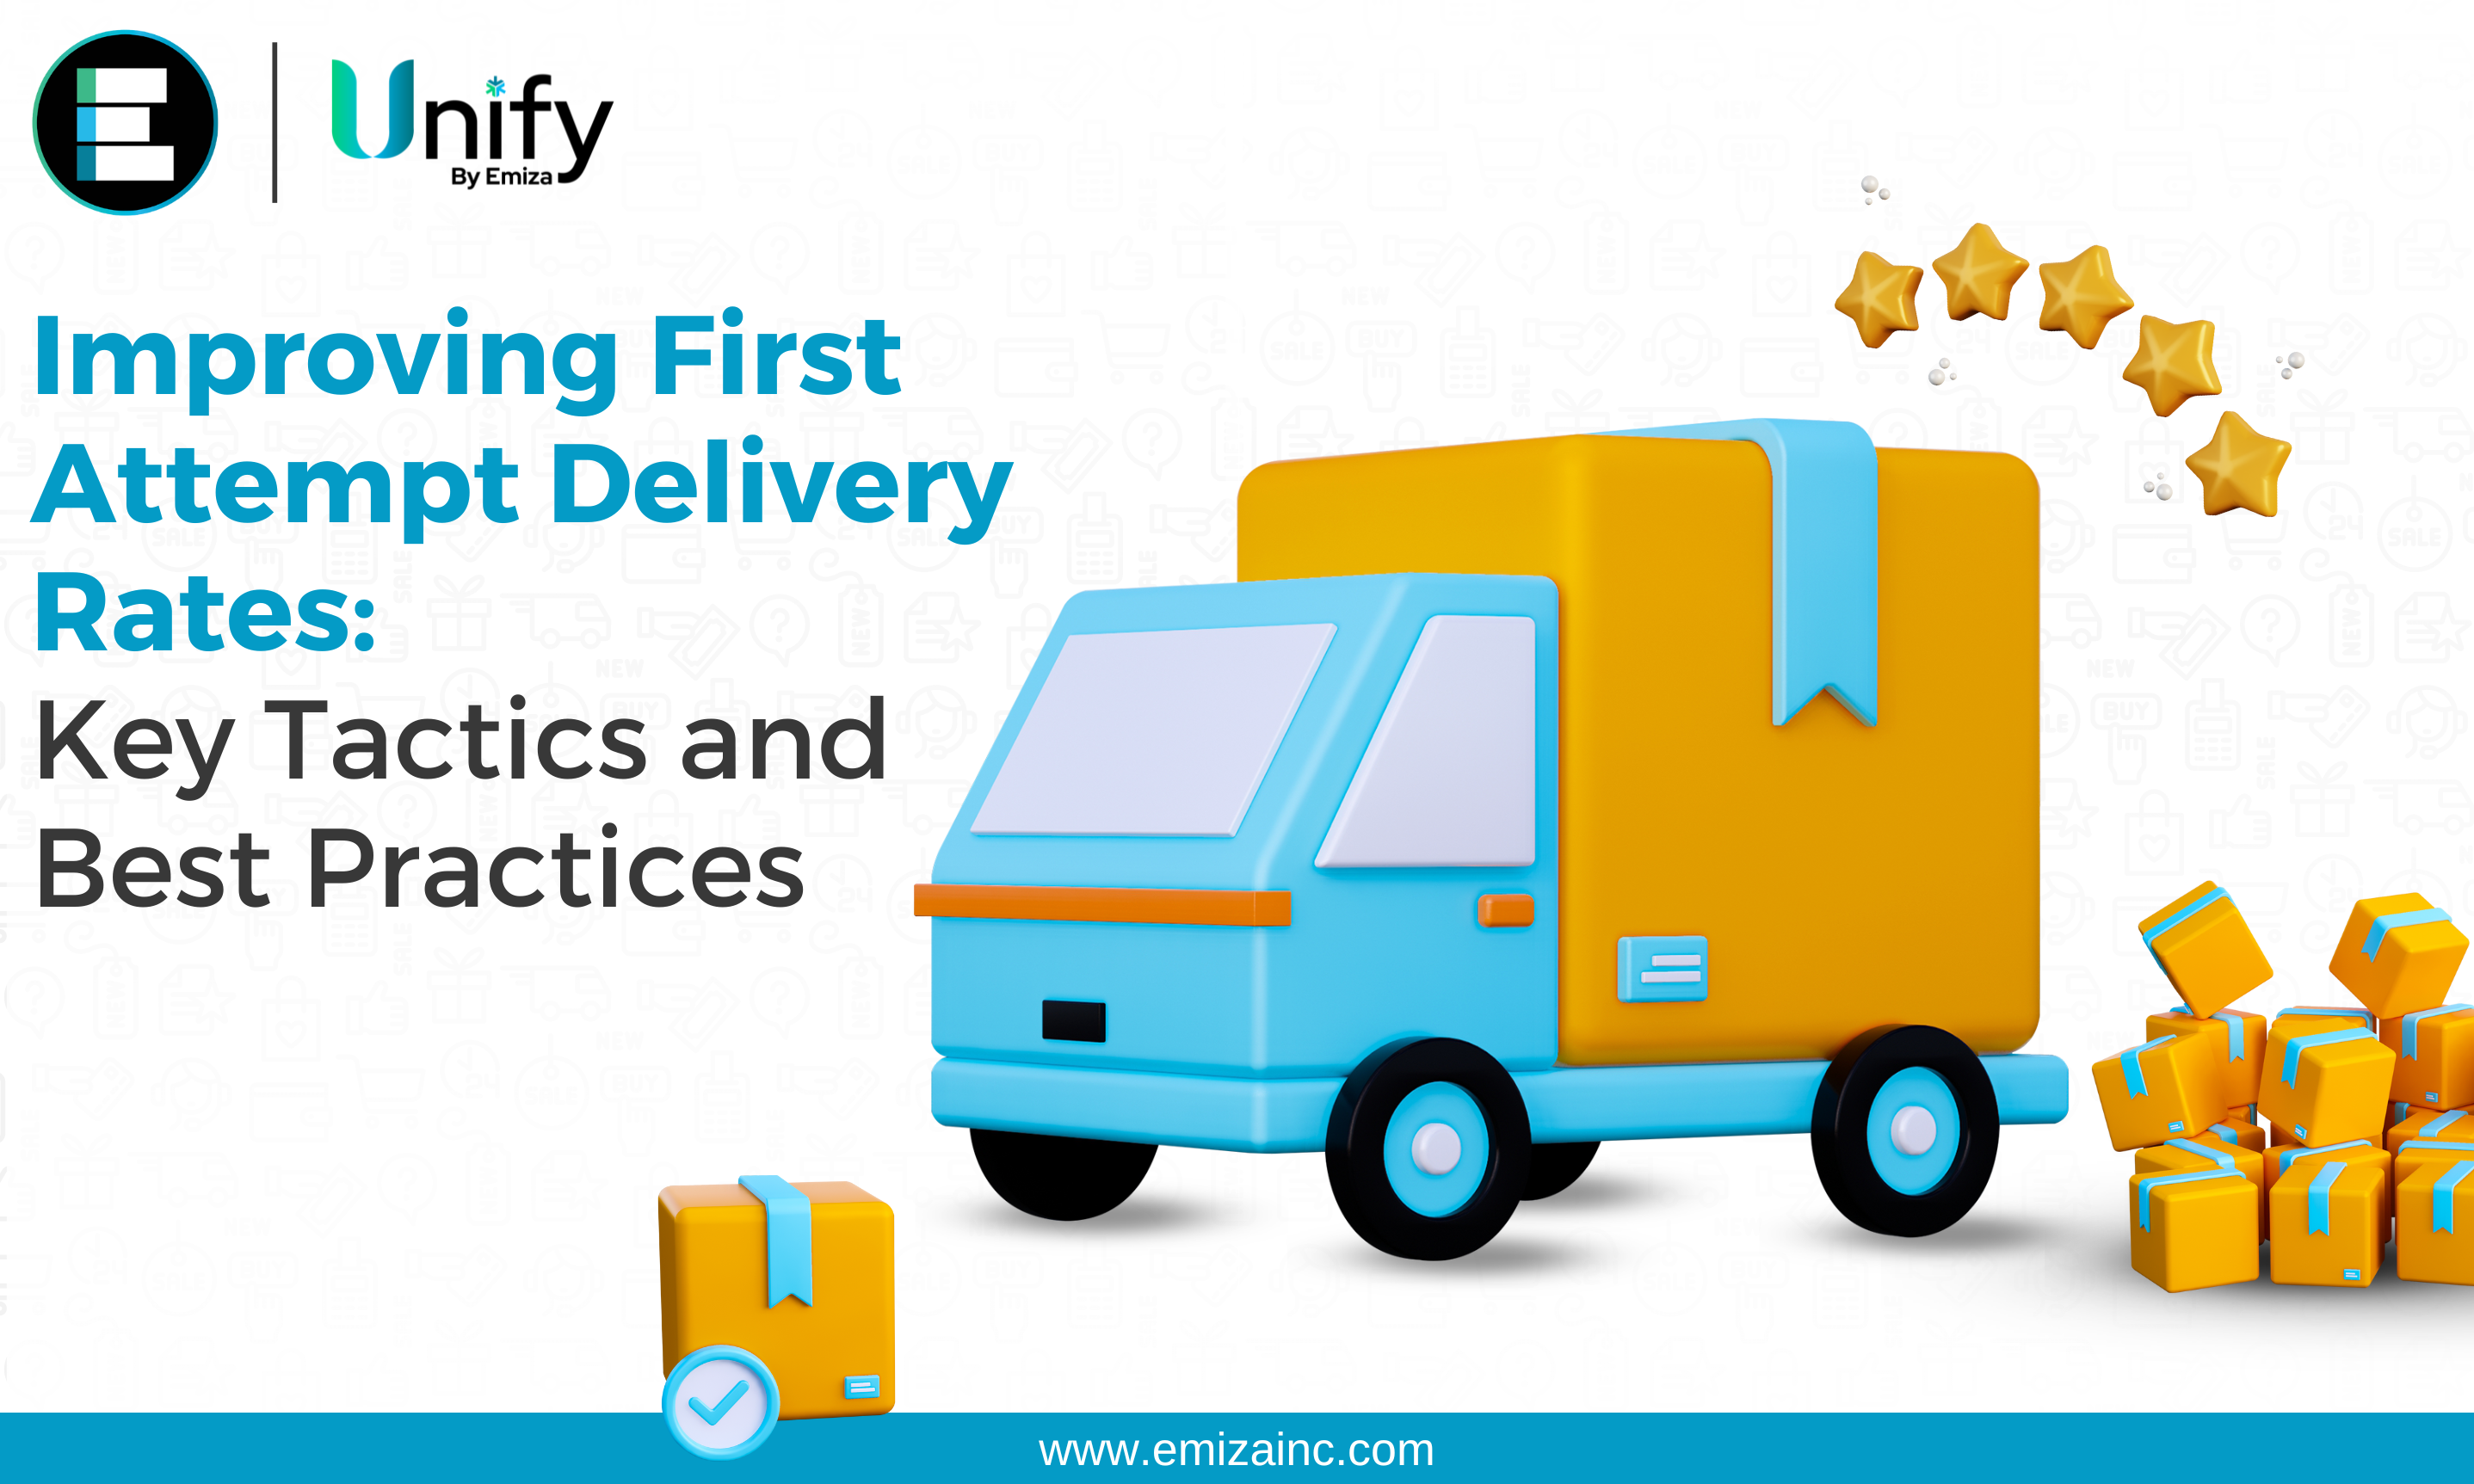 Improving First Attempt Delivery Rates: Key Tactics and Best Practices